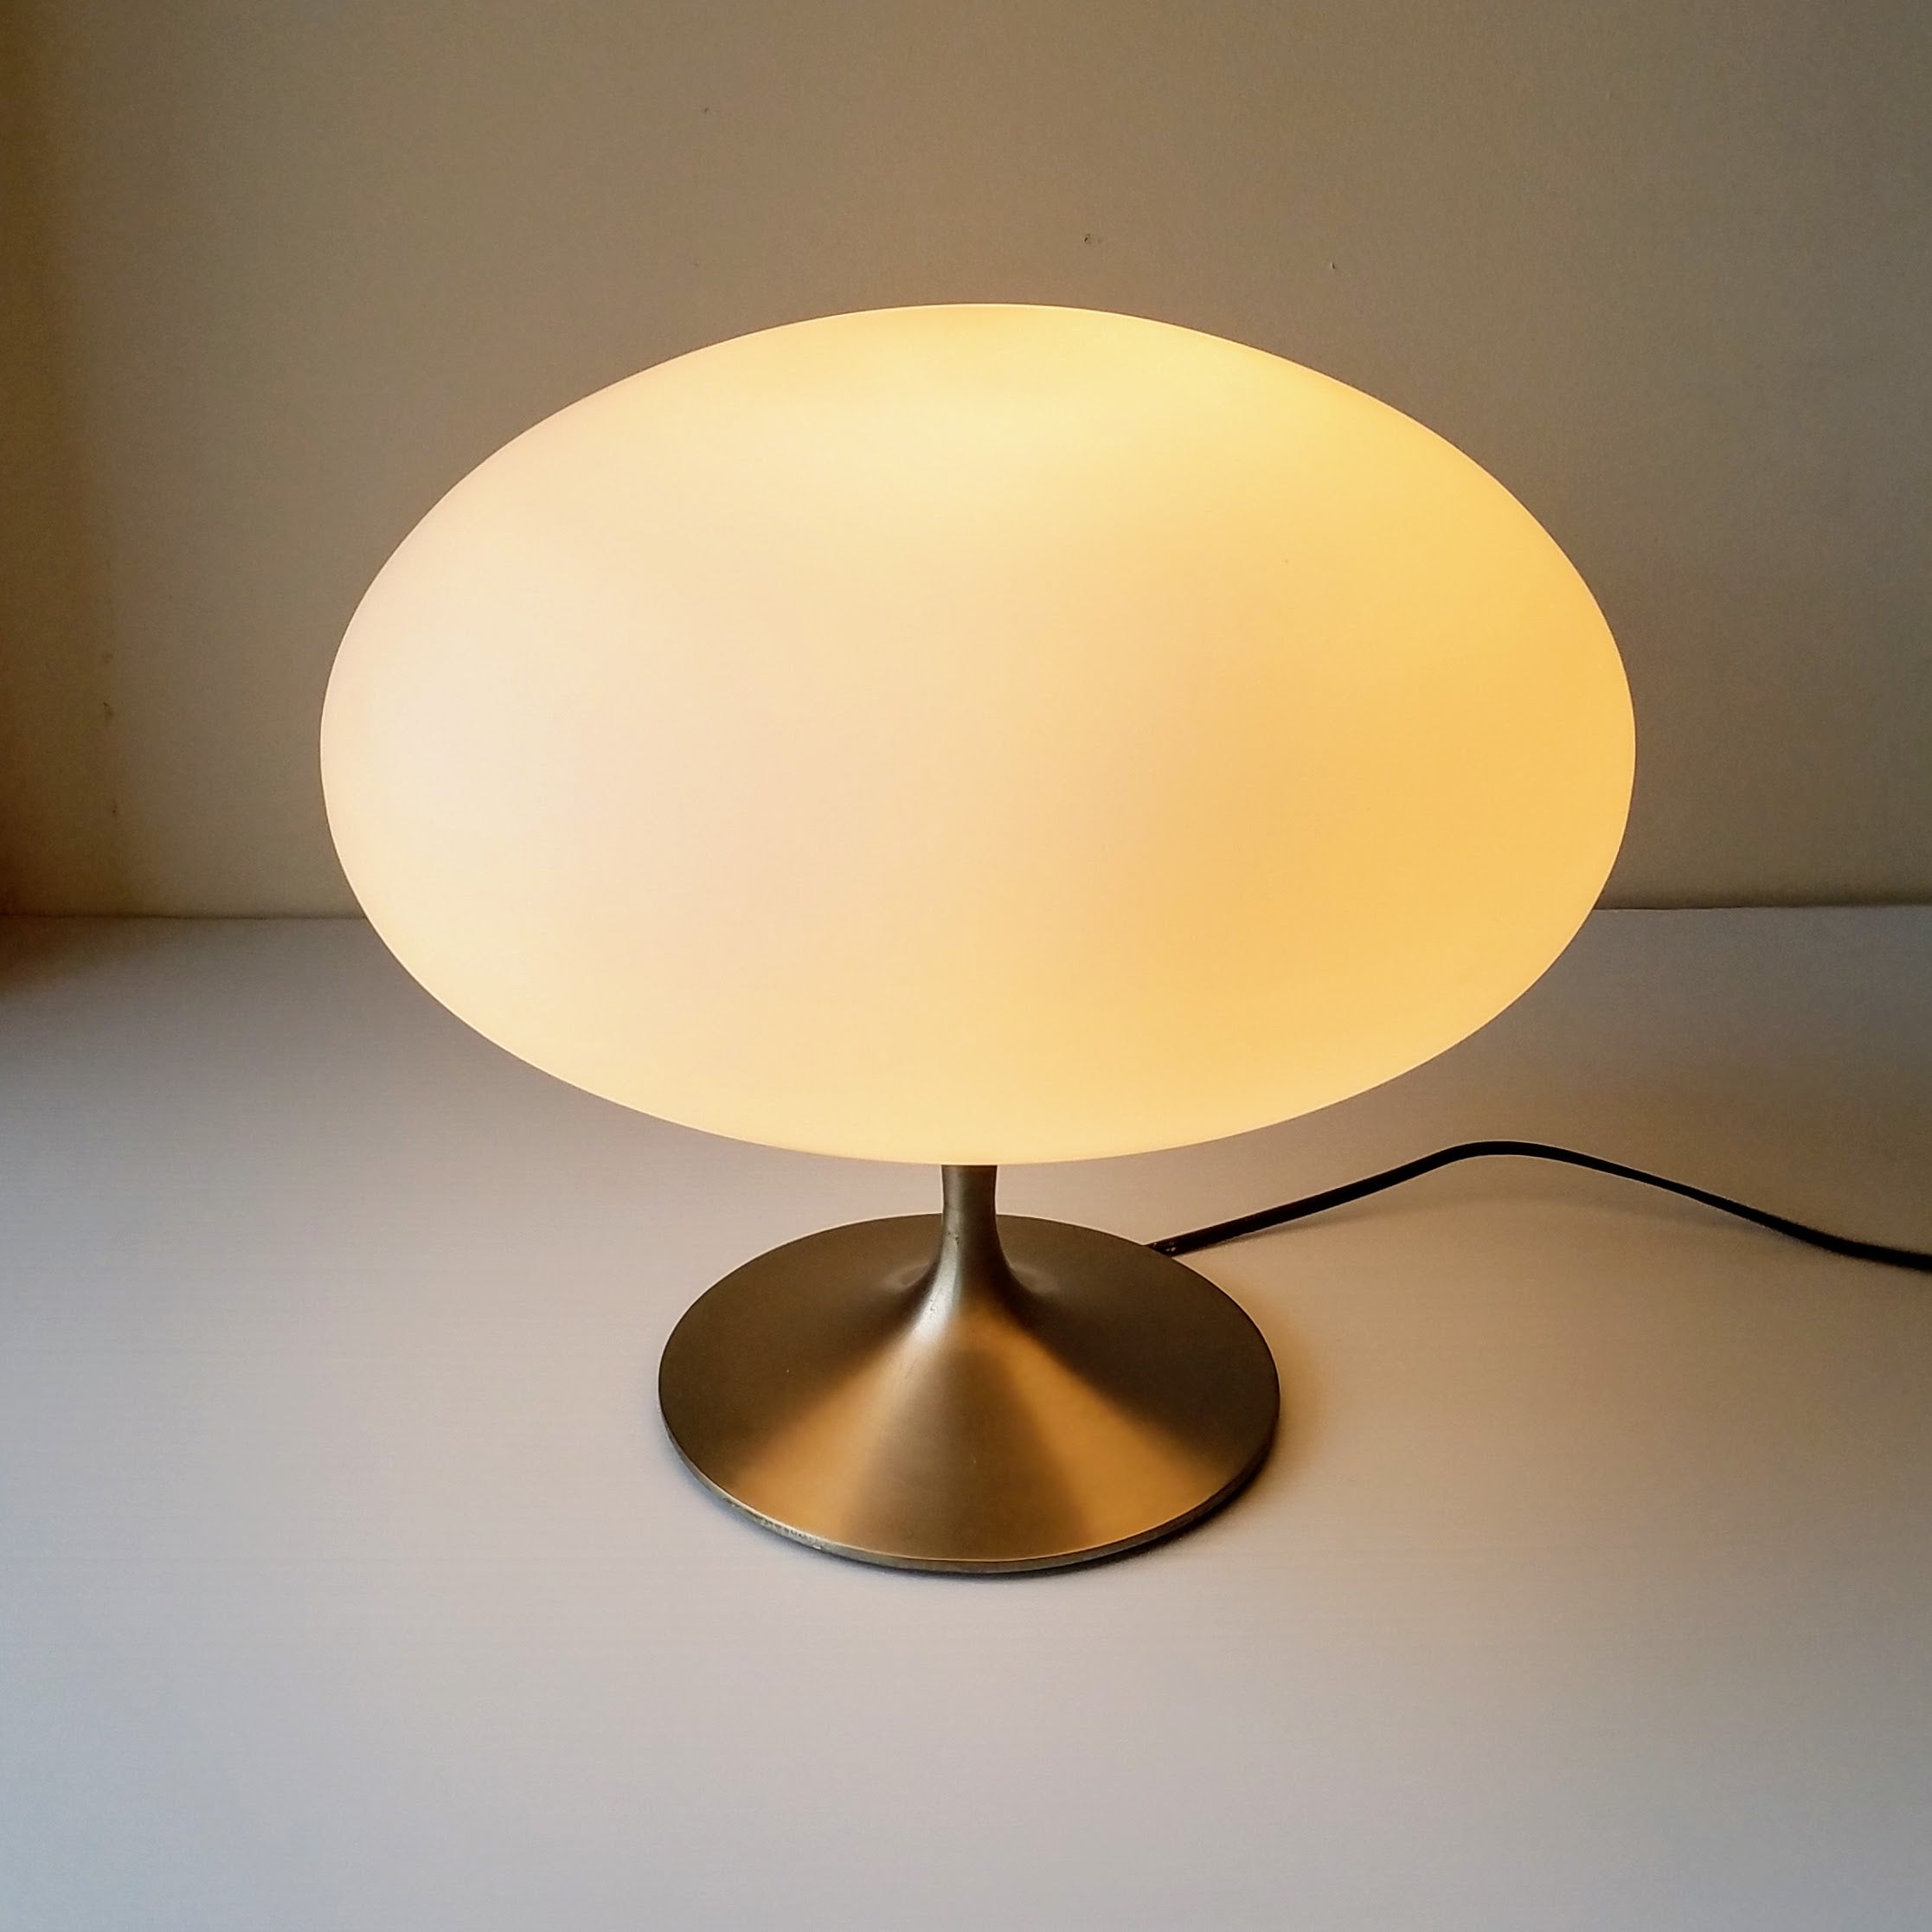 Bill Curry Table Lamp